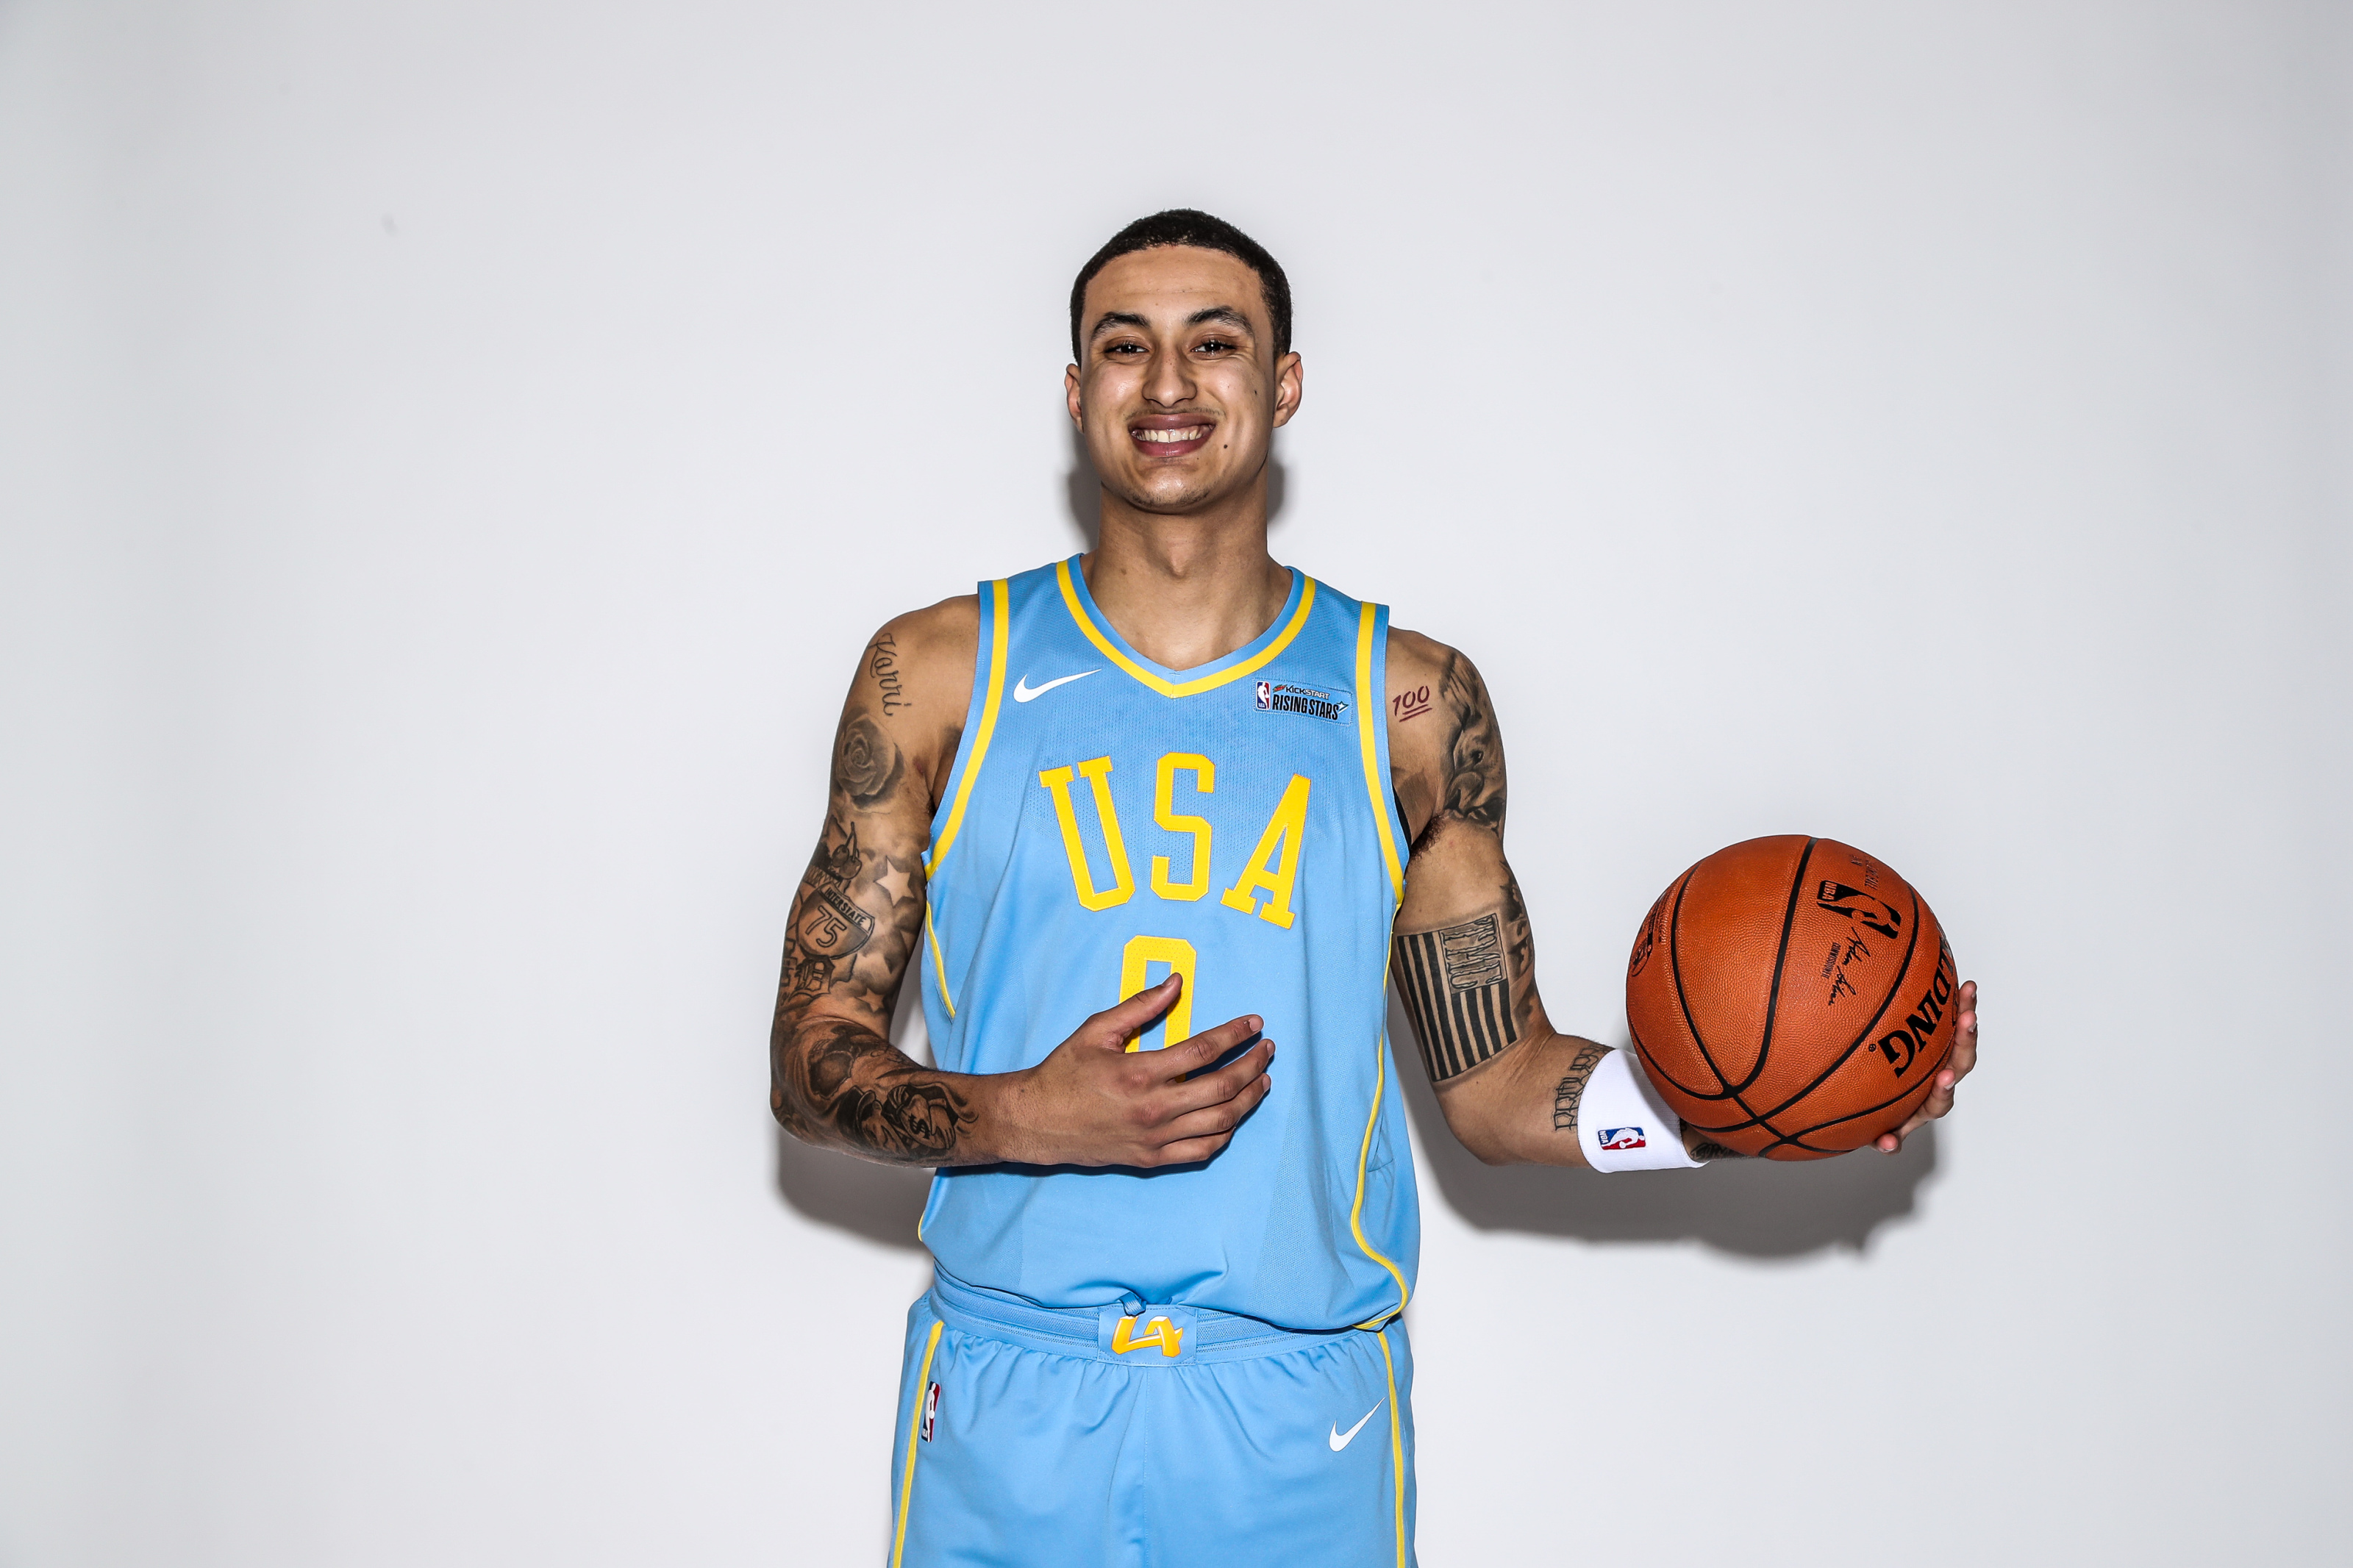 Lakers: Kyle Kuzma compared himself to James Worthy after wearing